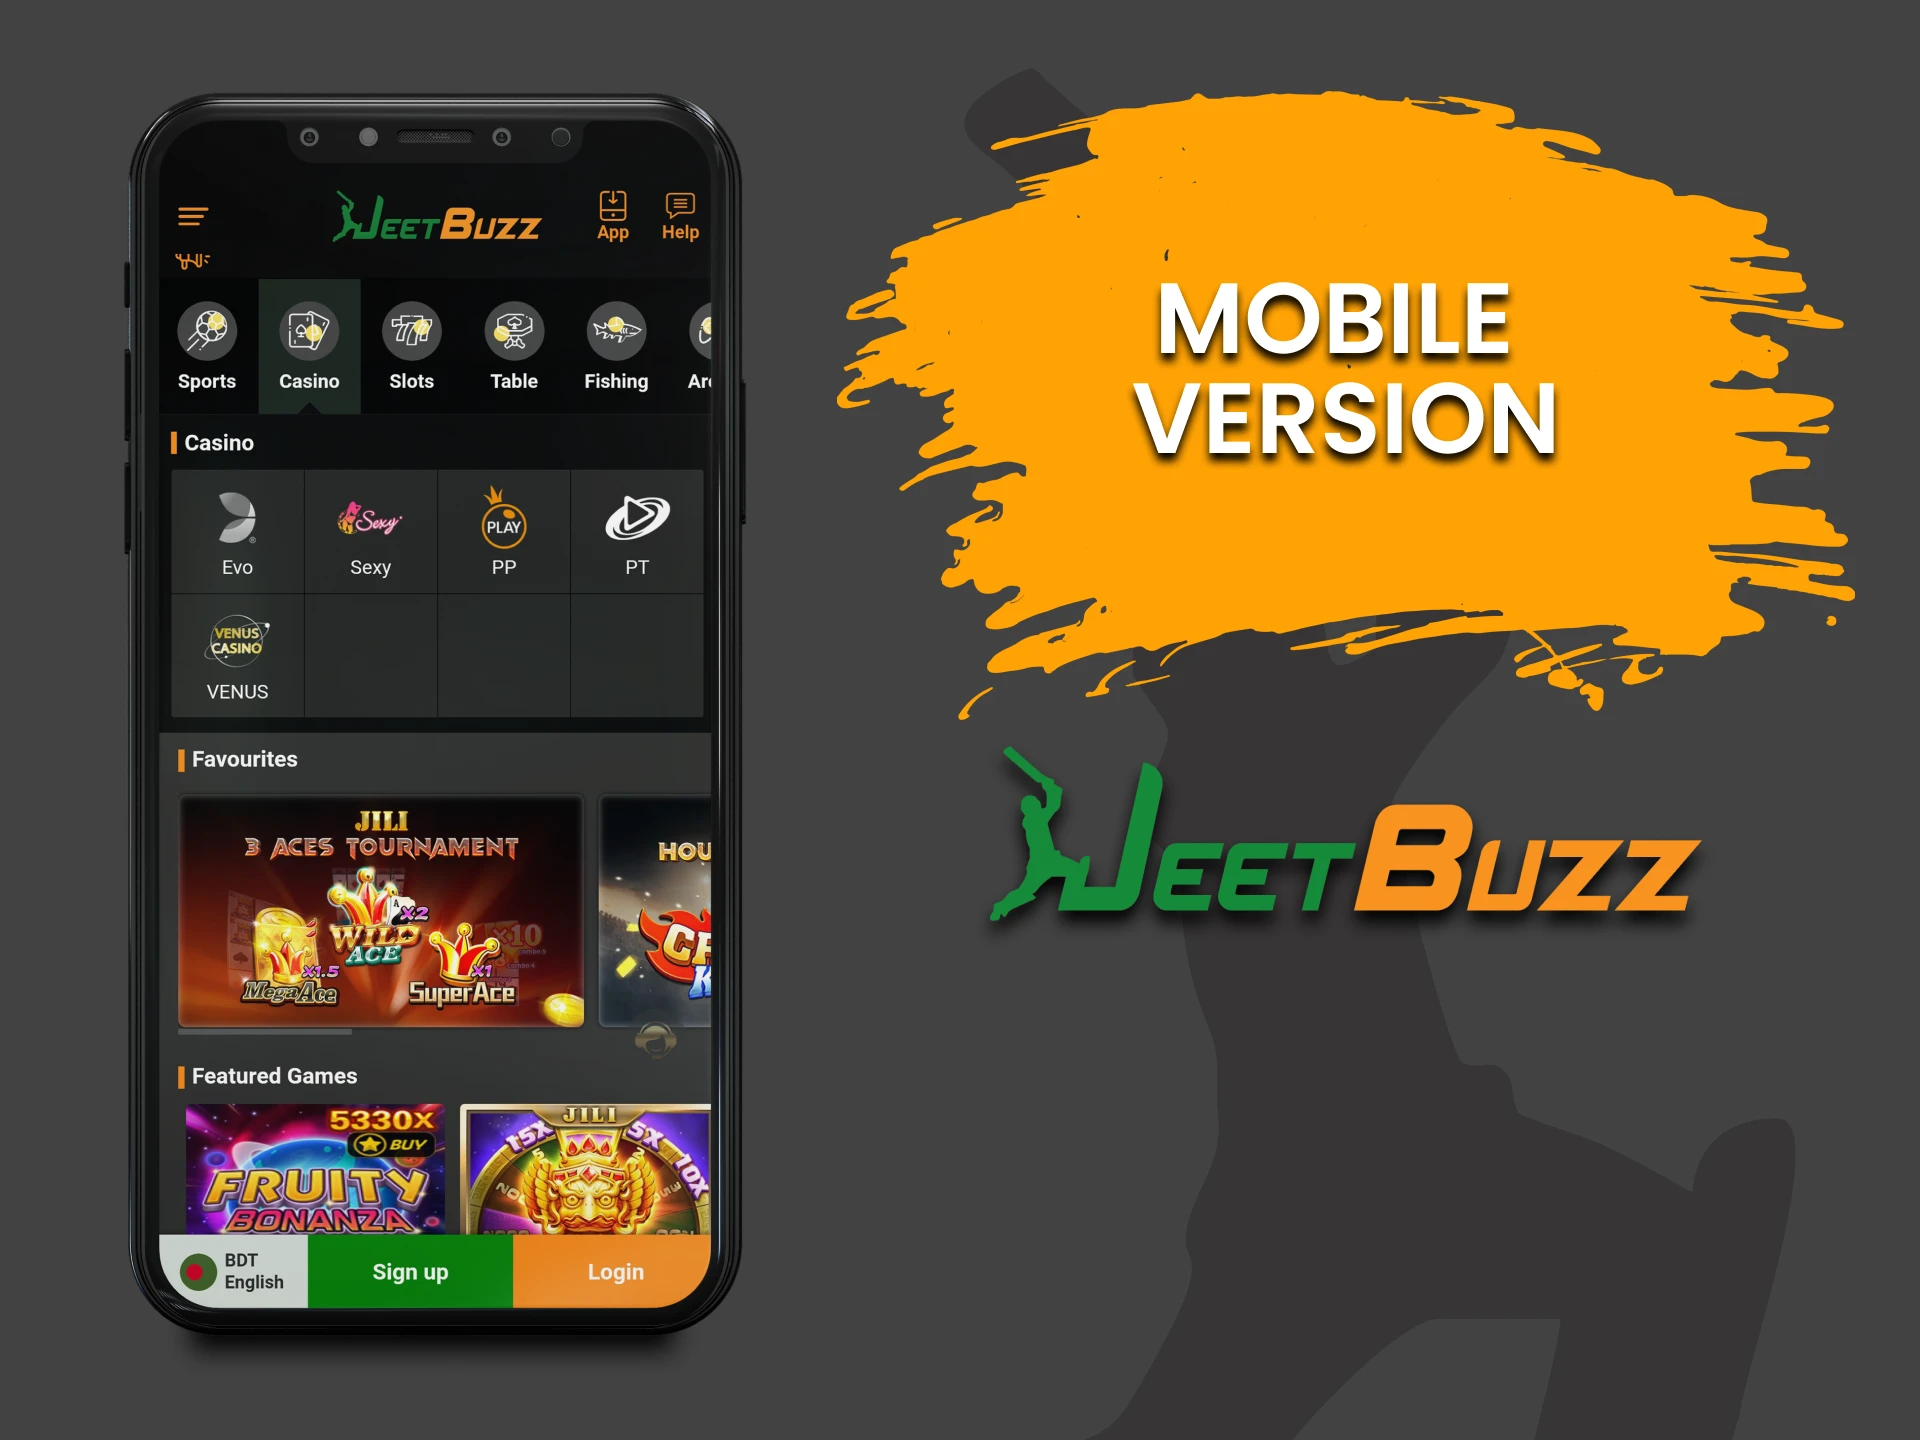 Visit the mobile version of the JeetBuzz website.